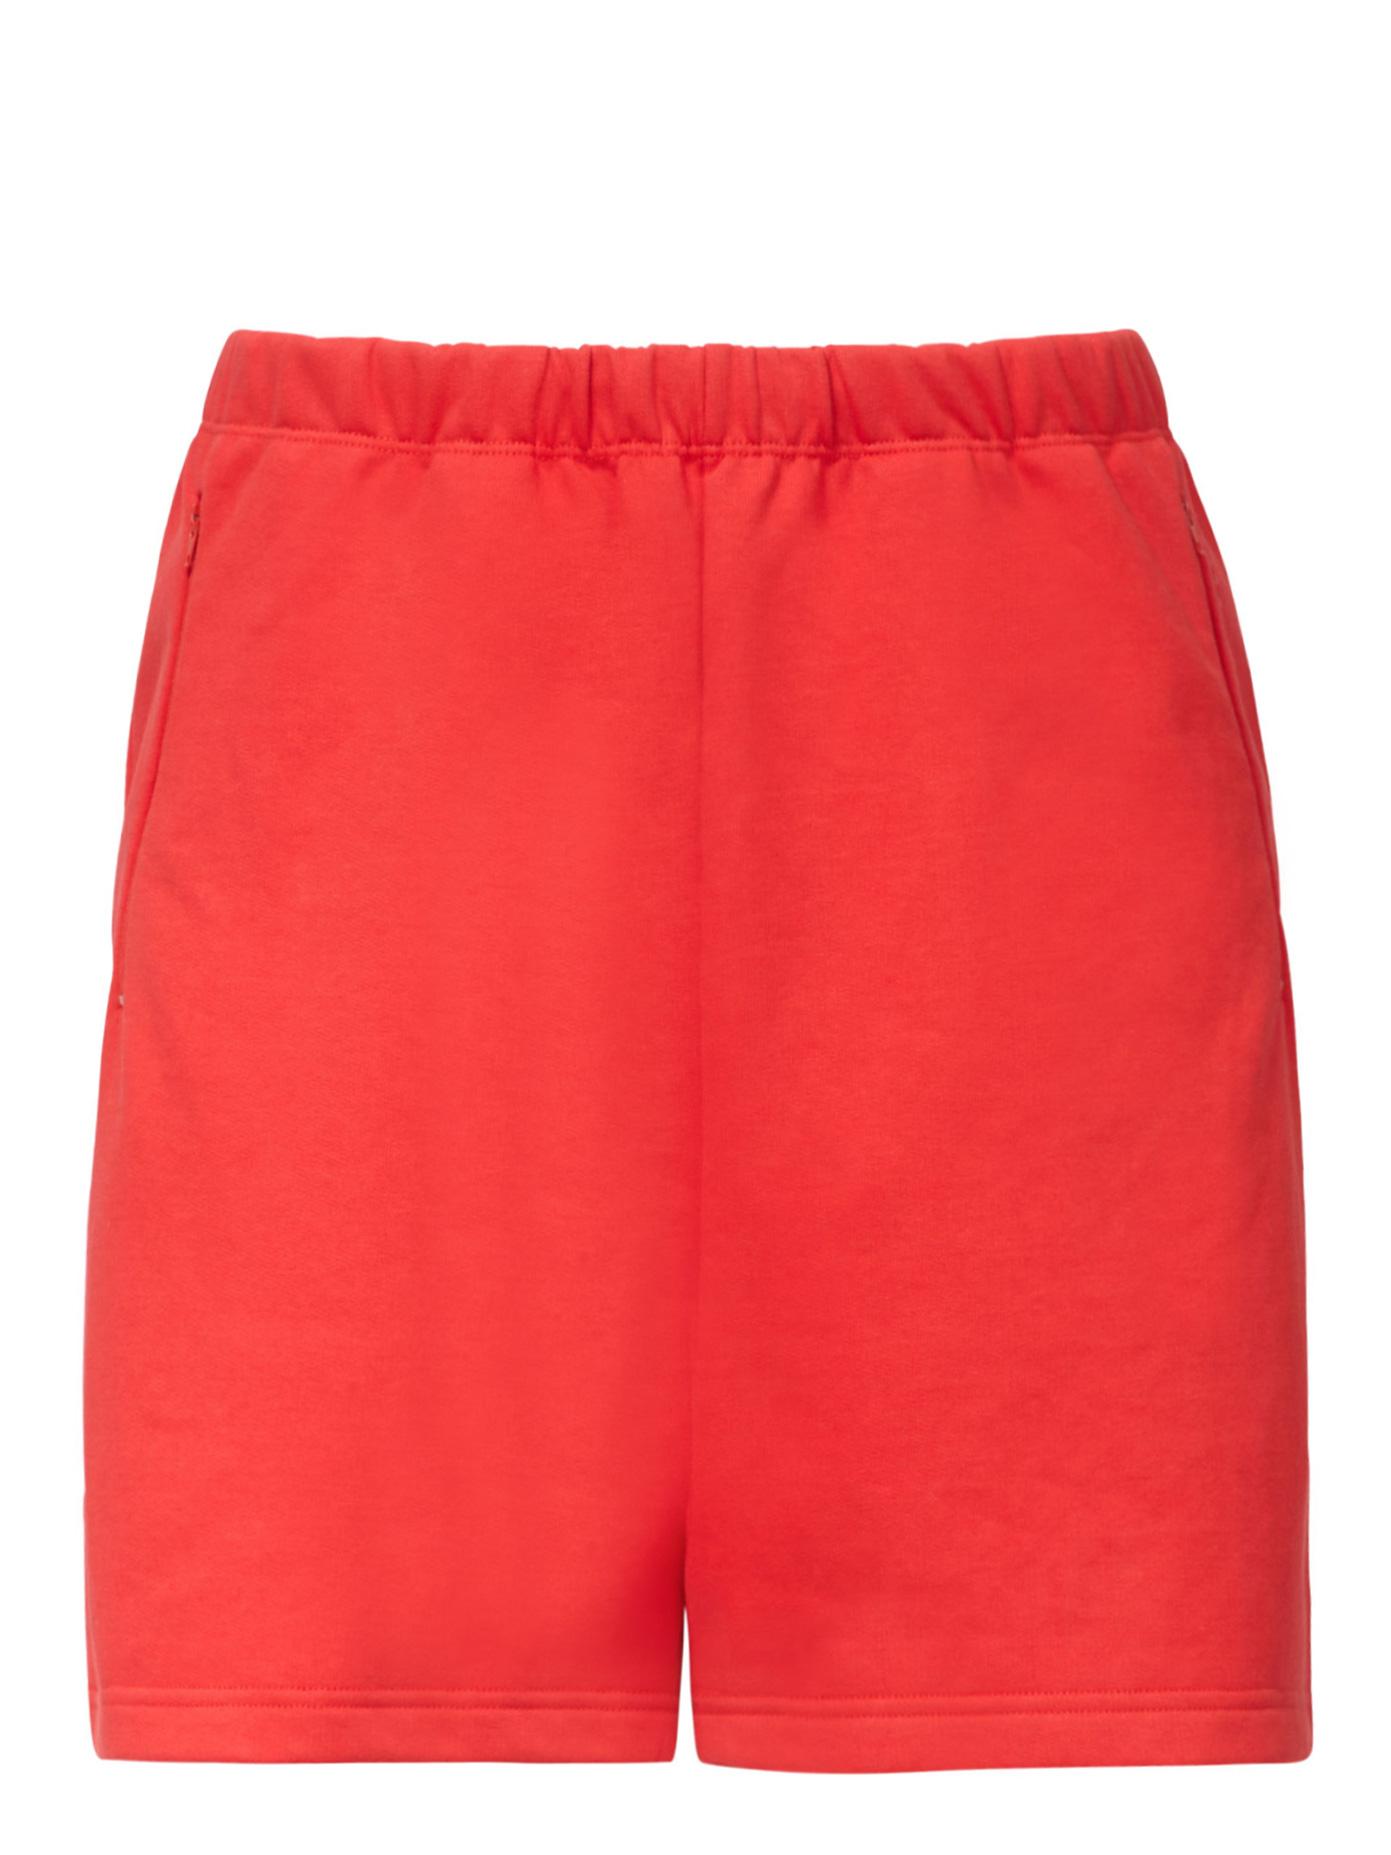 Lyst - Balenciaga Cotton Sweat Shorts in Red for Men